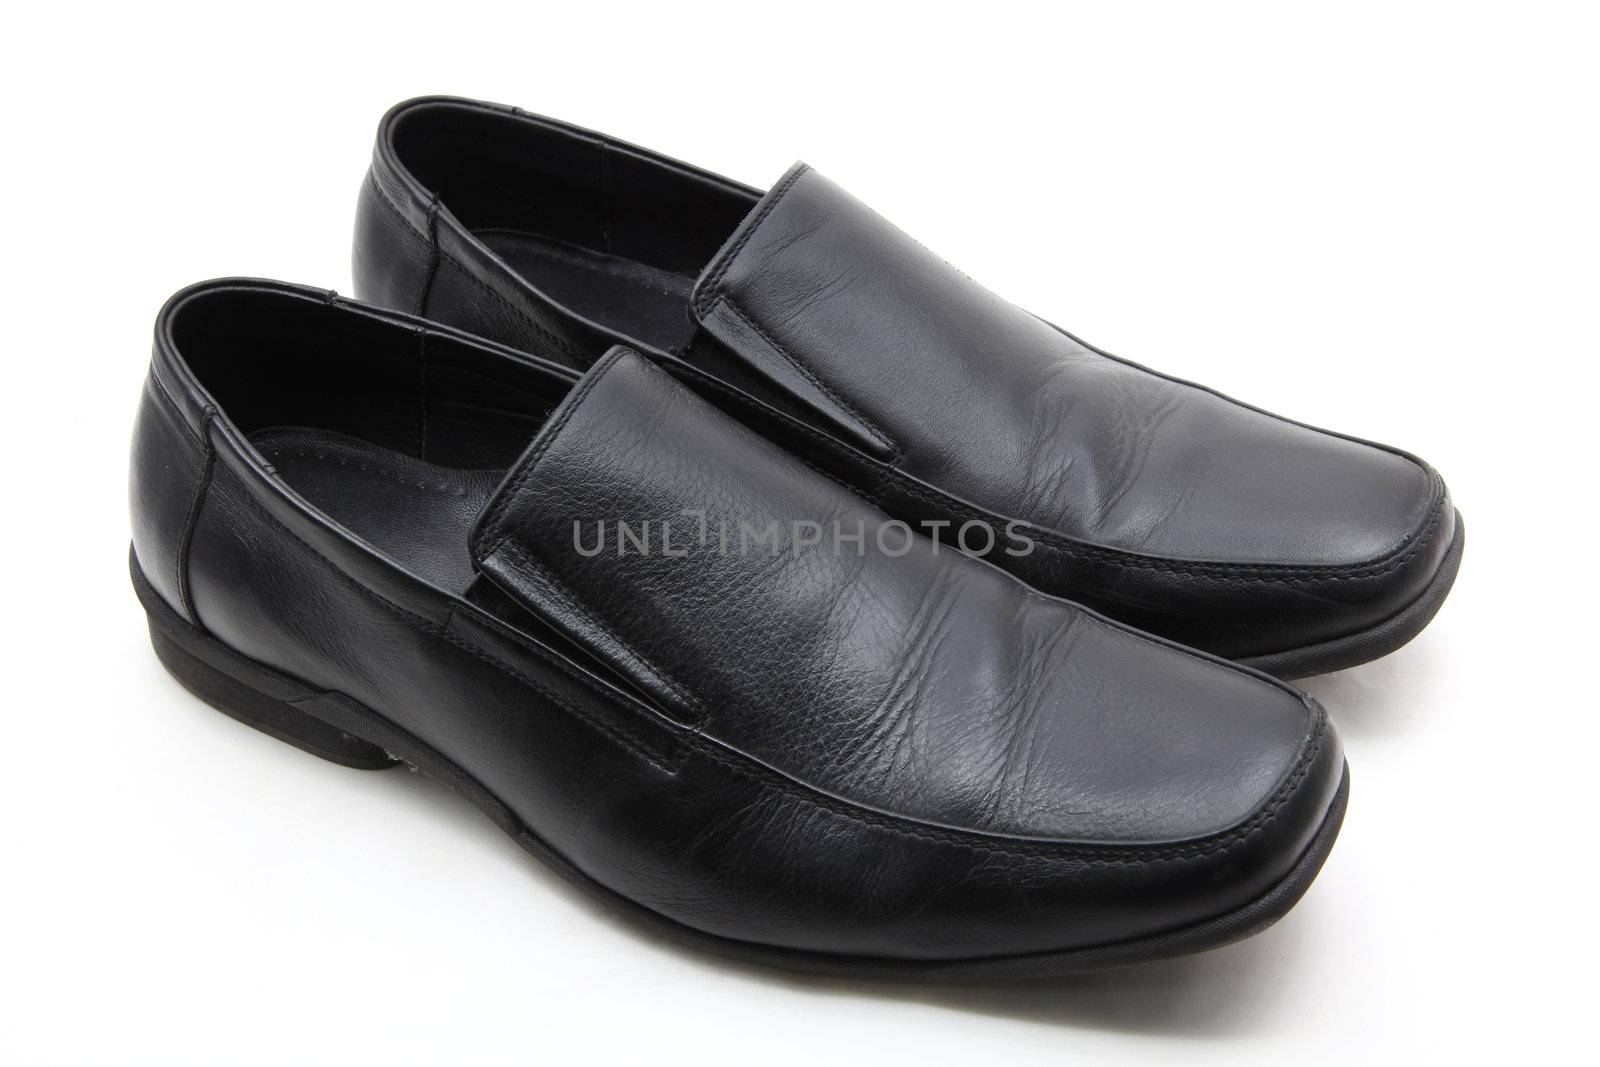 luxury pairs of black leather business man shoes on white background